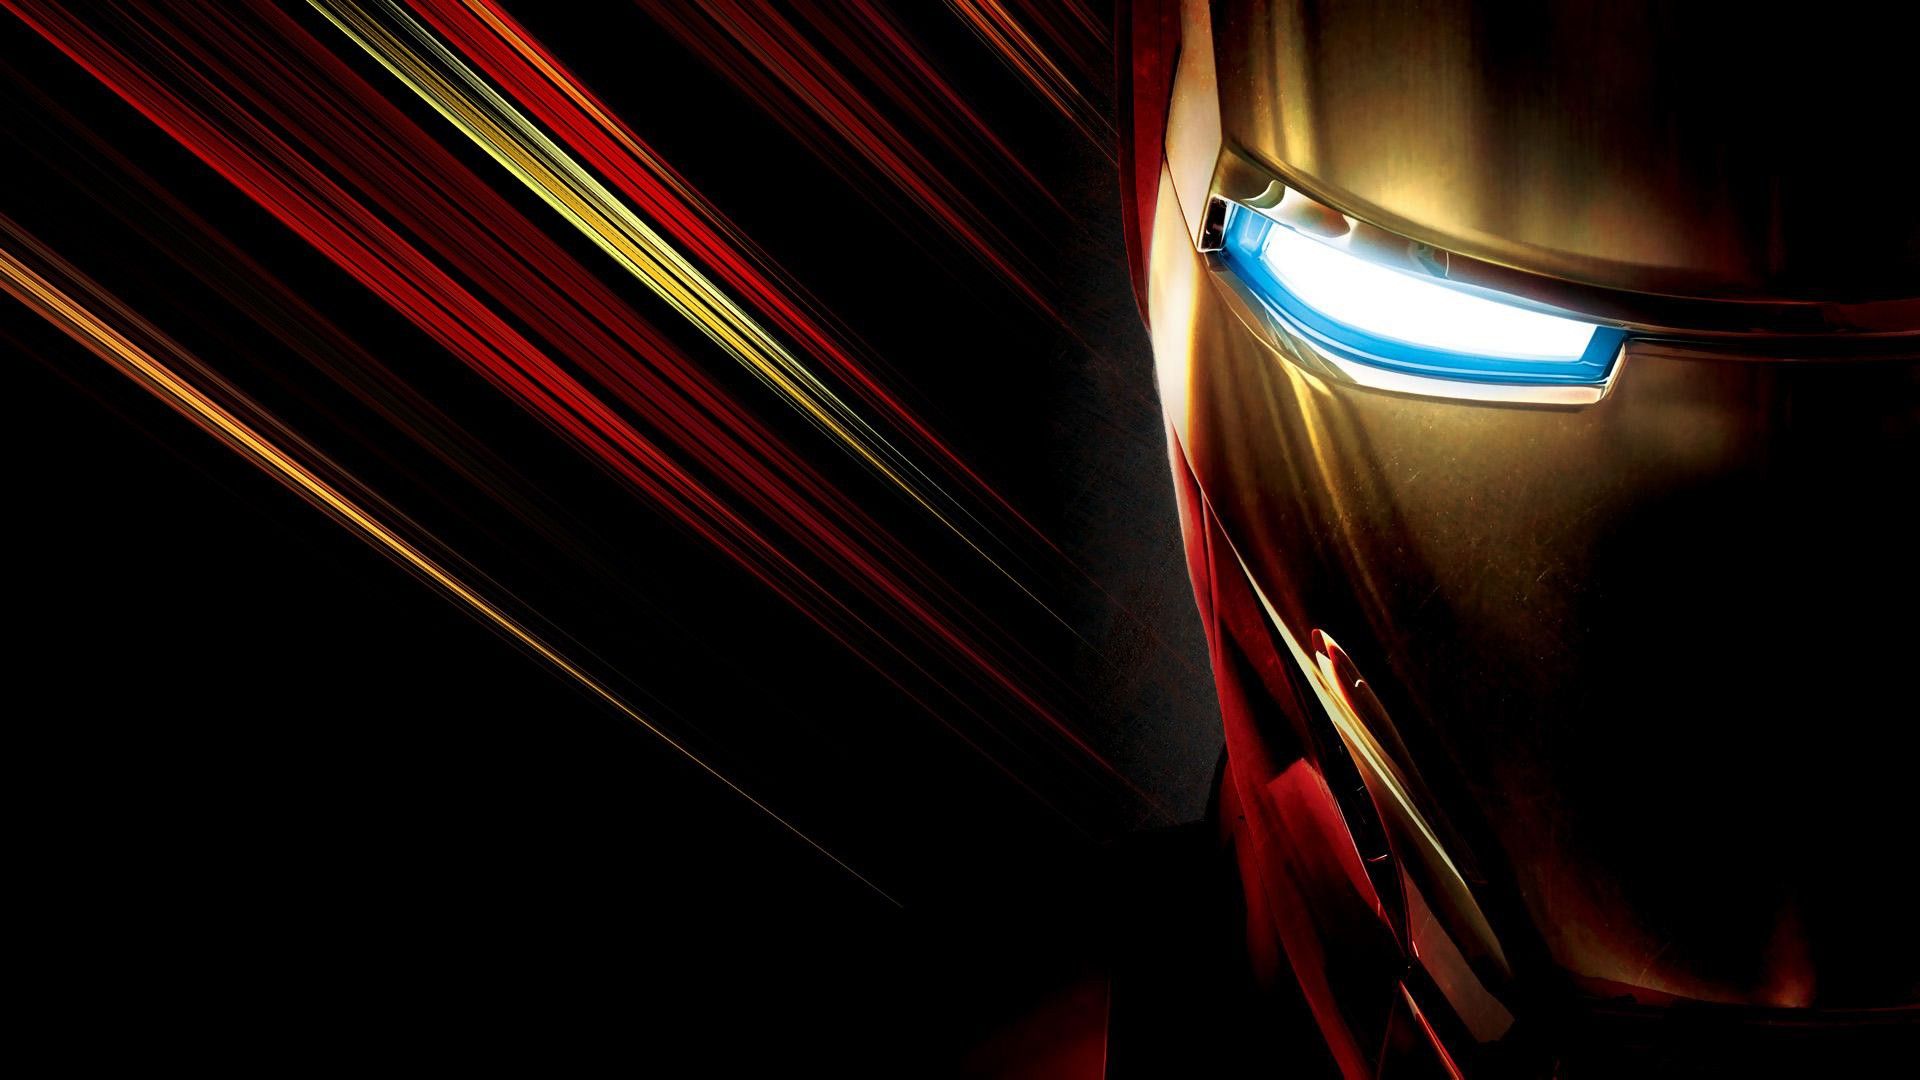 Iron Man Pics And Wallpapers Group (93+)